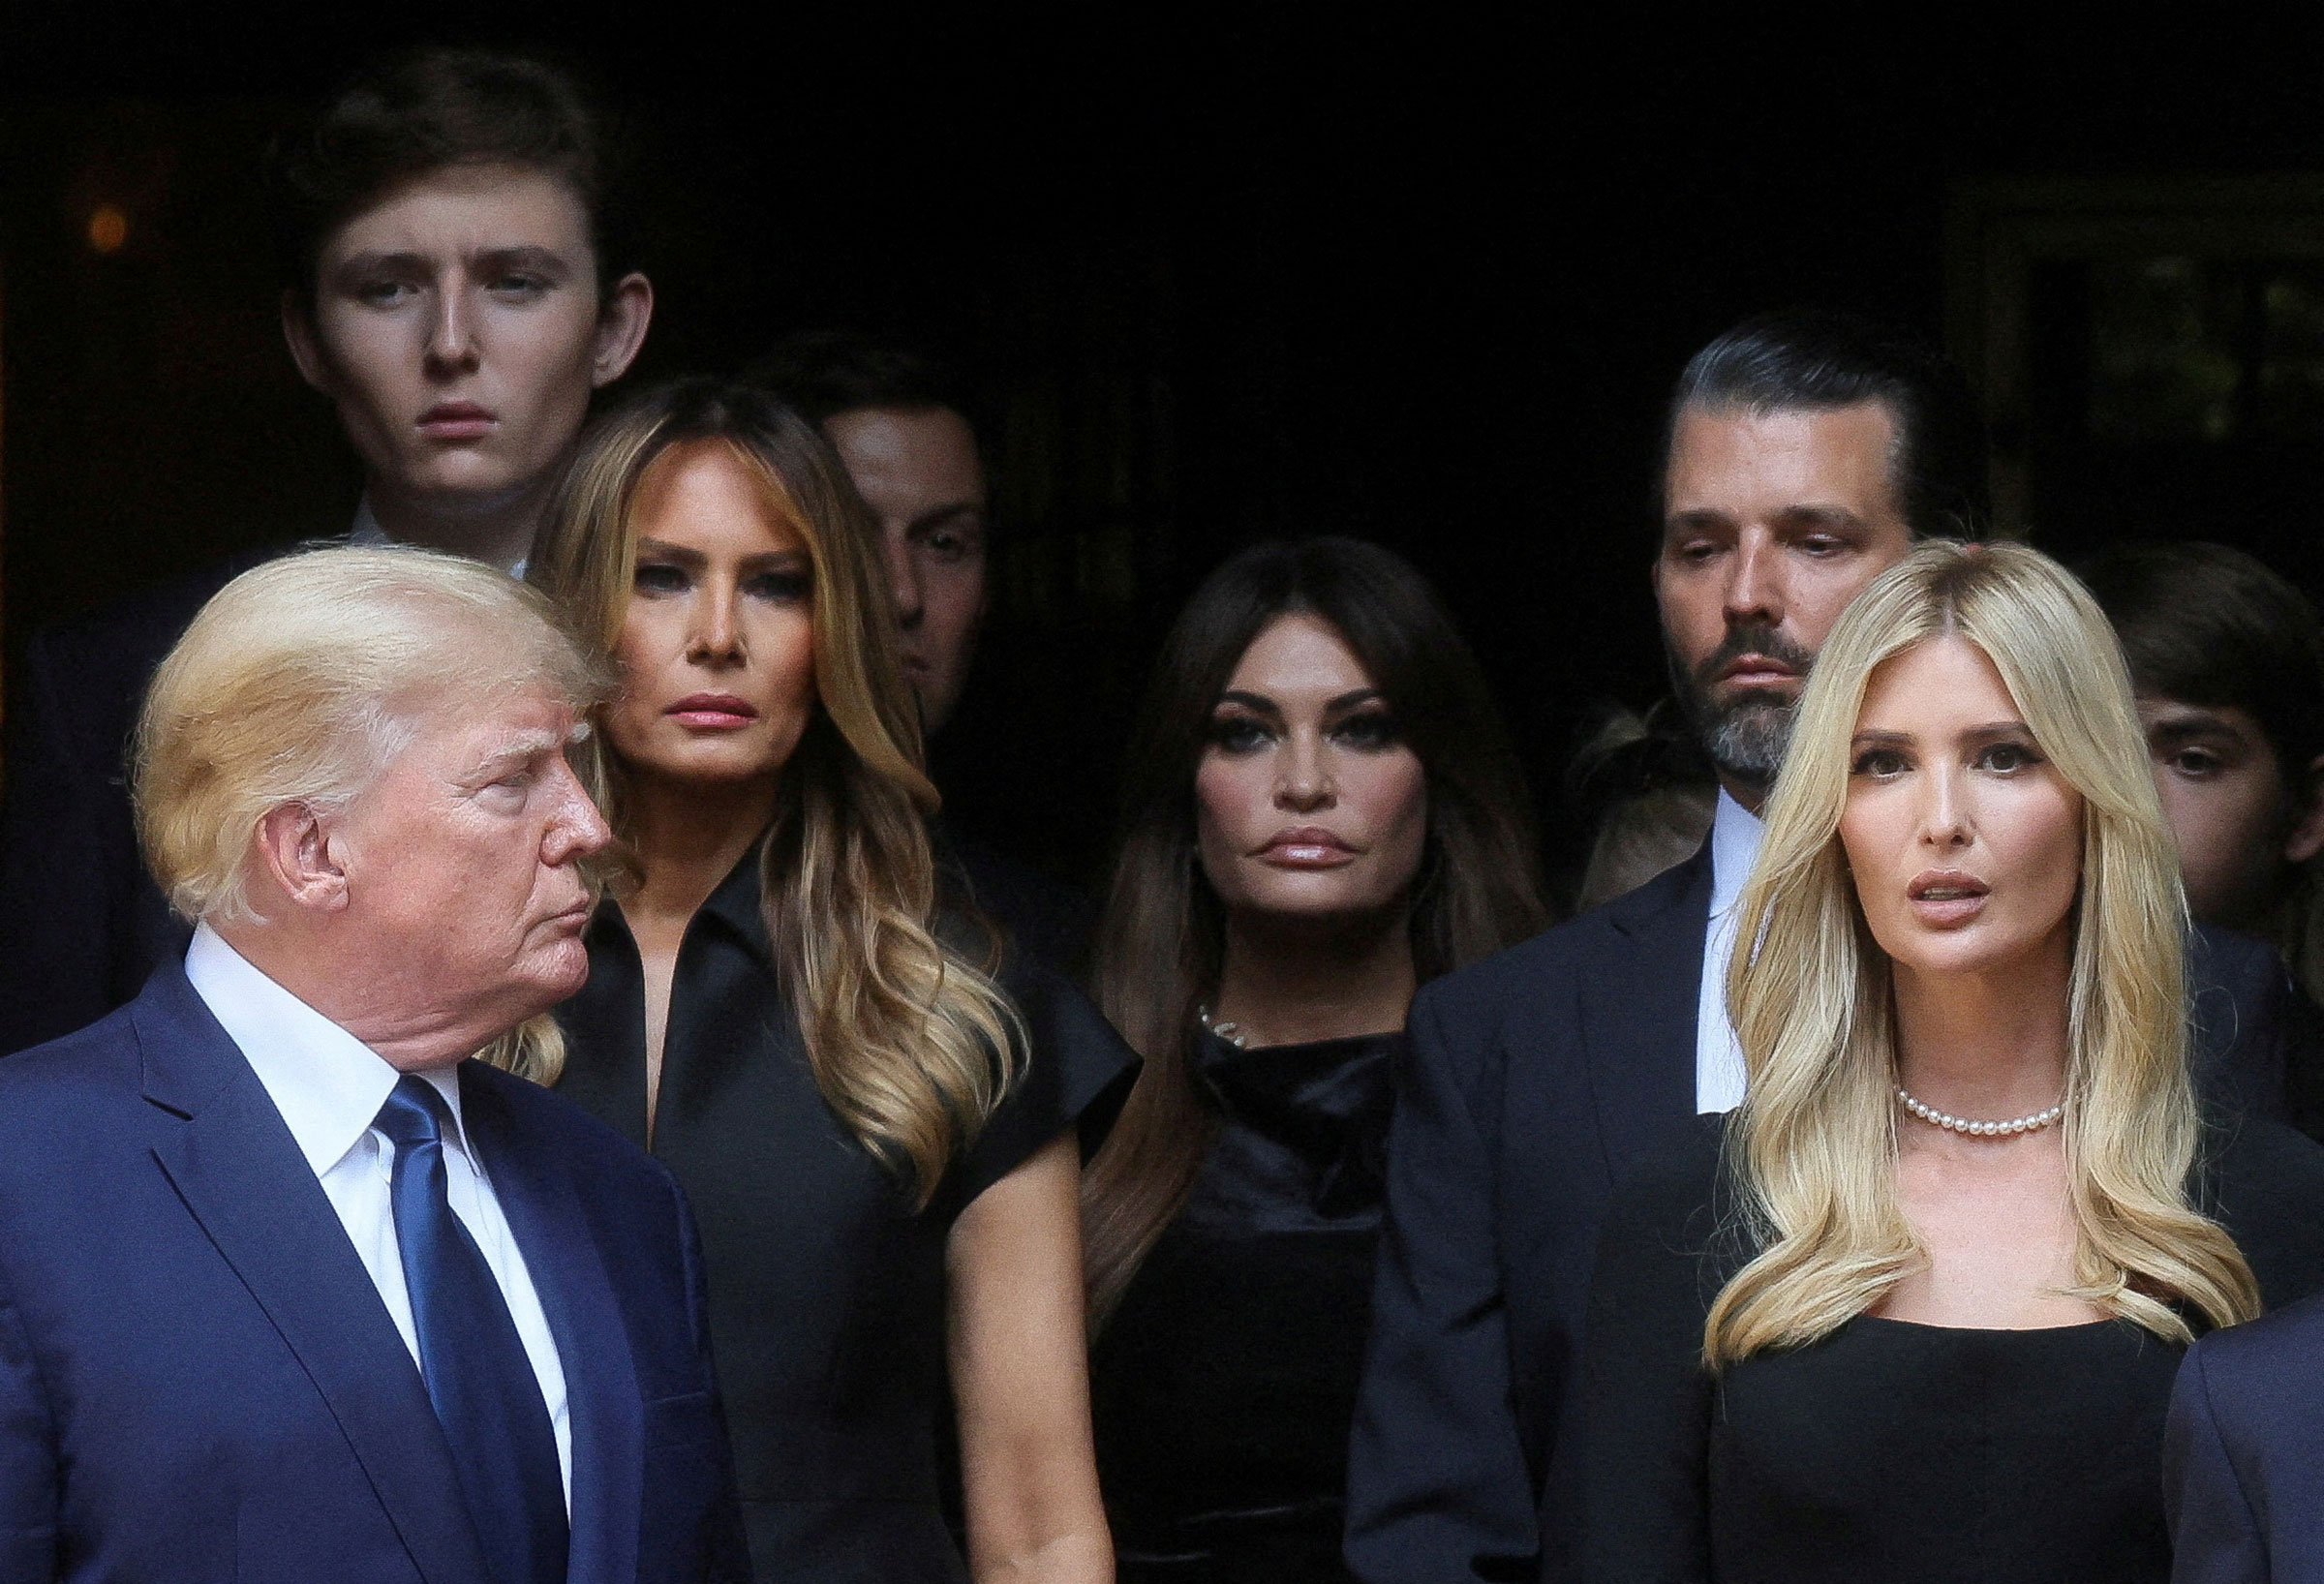 Former U.S. President Donald Trump, his wife Melania, Kimberly Guilfoyle, his sons Barron and Donald Jr. and his daughter Ivanka leave St. Vincent Ferrer Church during the funeral of Ivana Trump, socialite and Trump's first wife, in New York City, on July 20. (Brendan McDermid—Reuters)